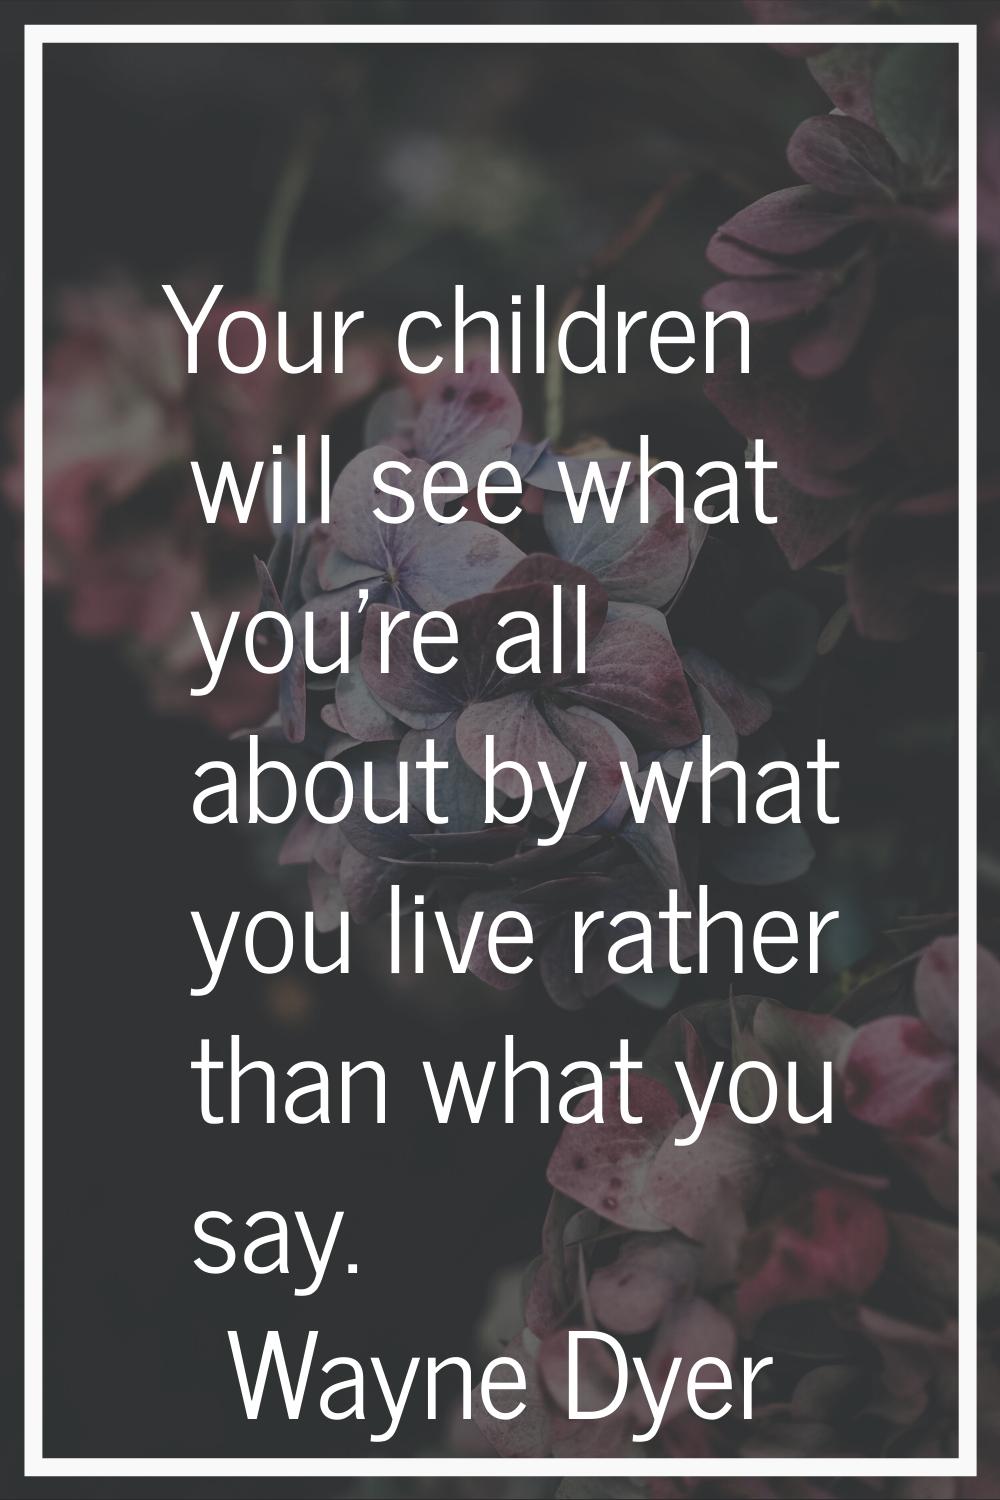 Your children will see what you're all about by what you live rather than what you say.